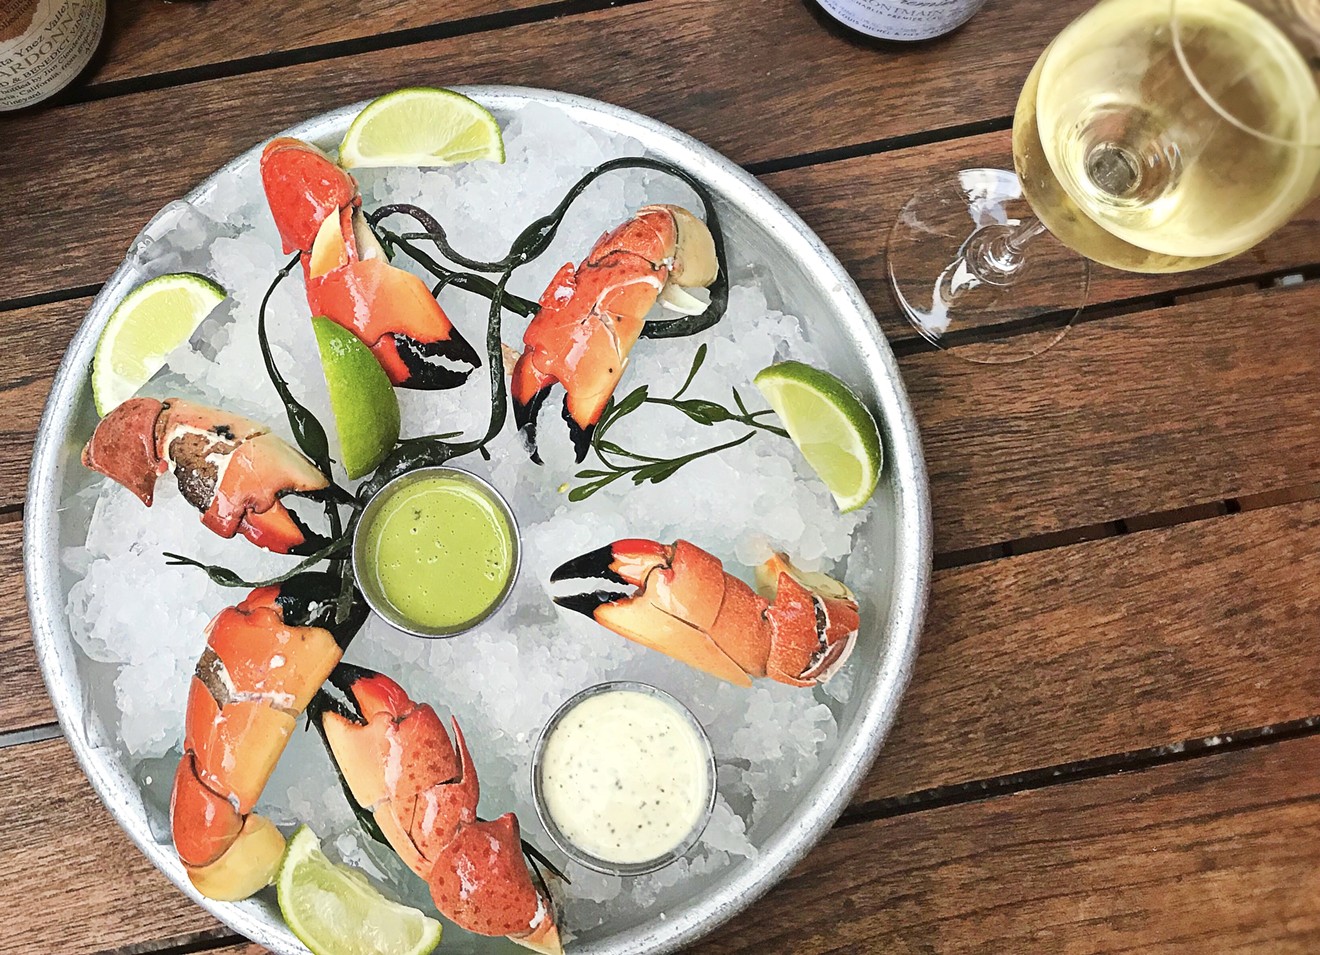 Claws will be cracking, because Florida stone crab season is finally here.